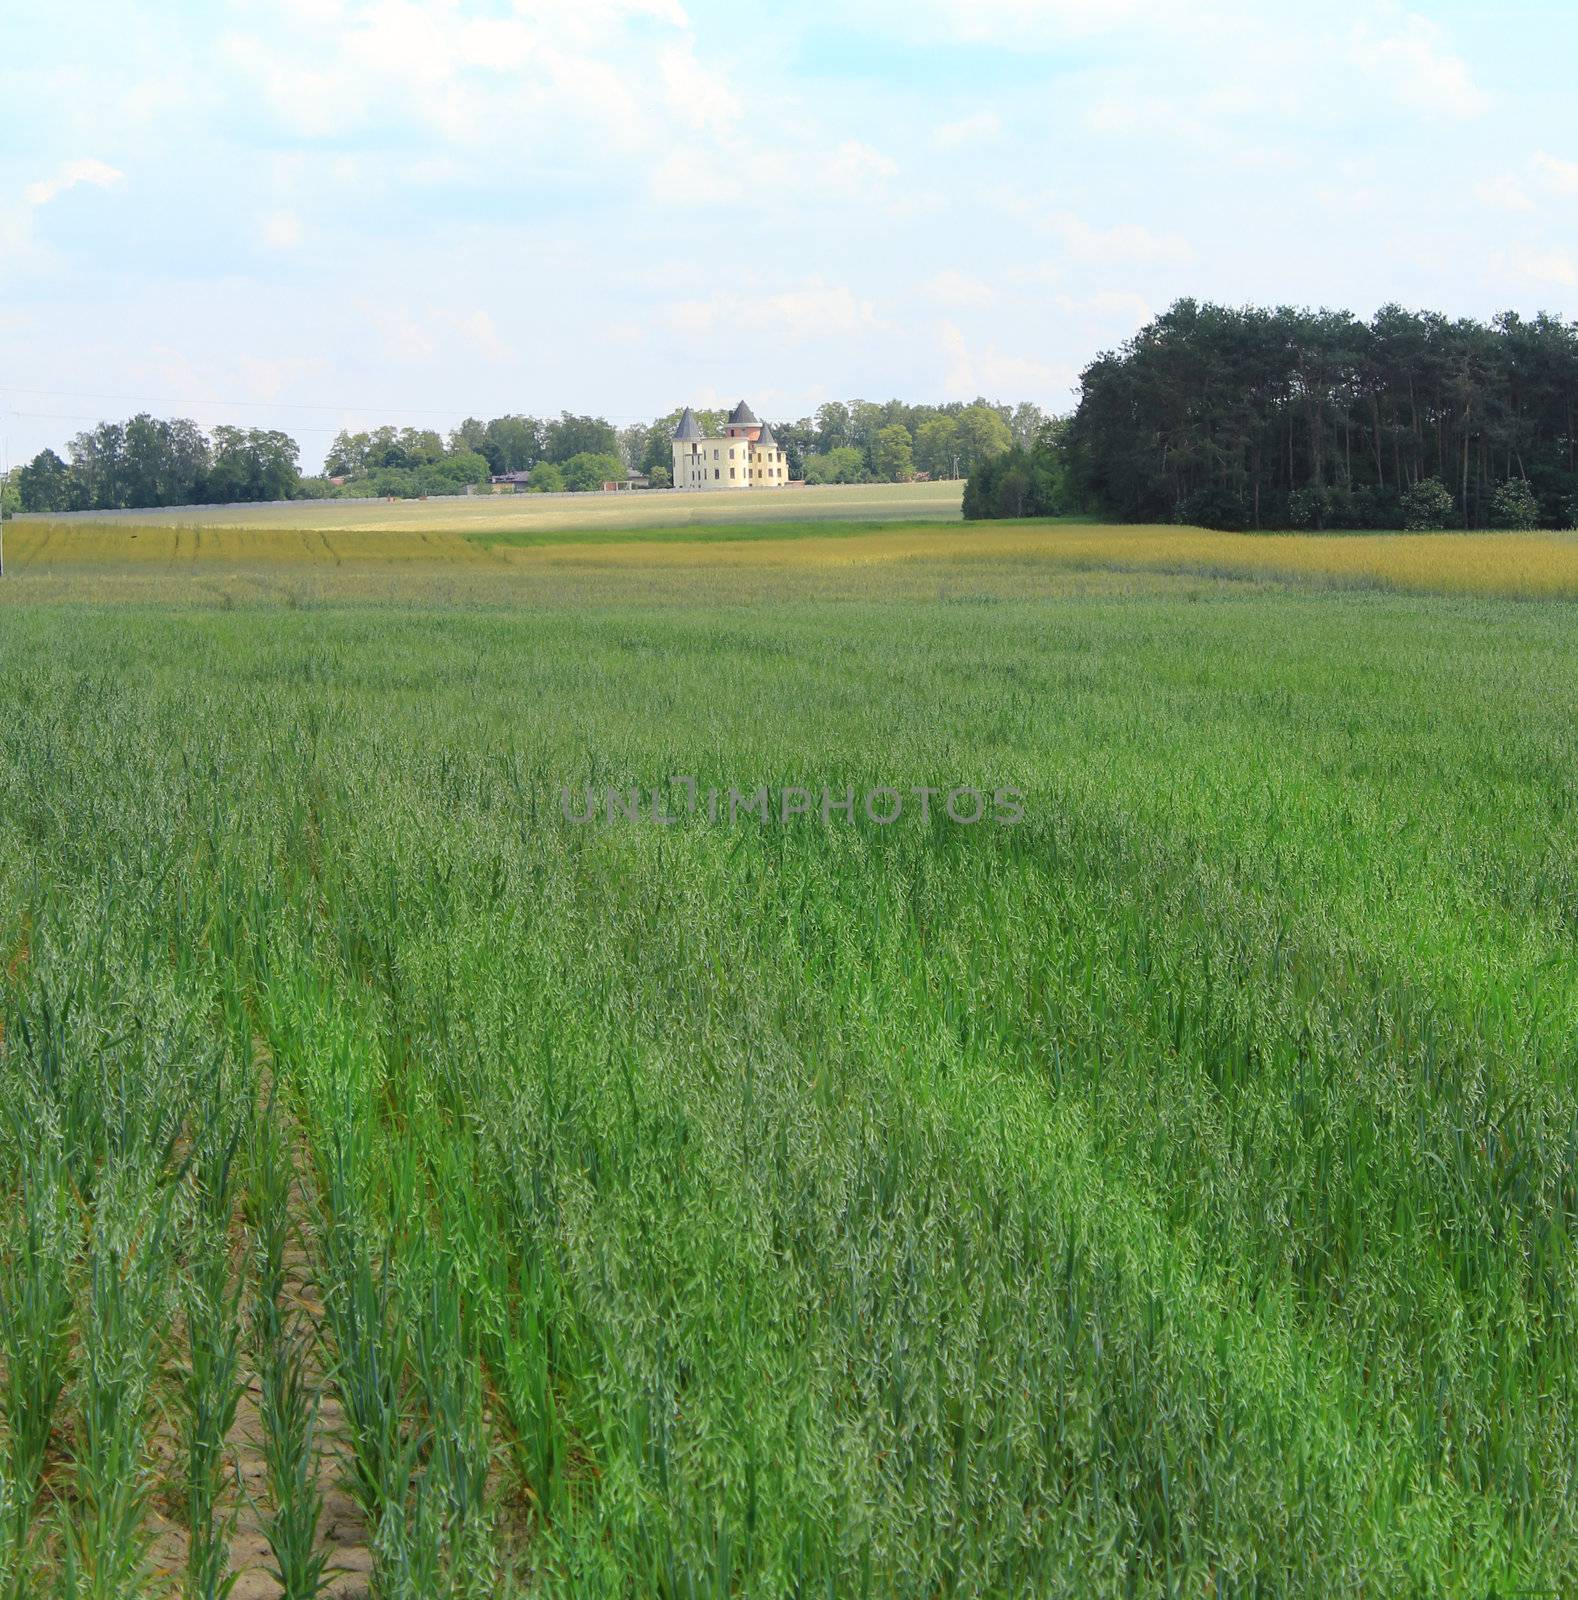 Agricultural field with a house in the background